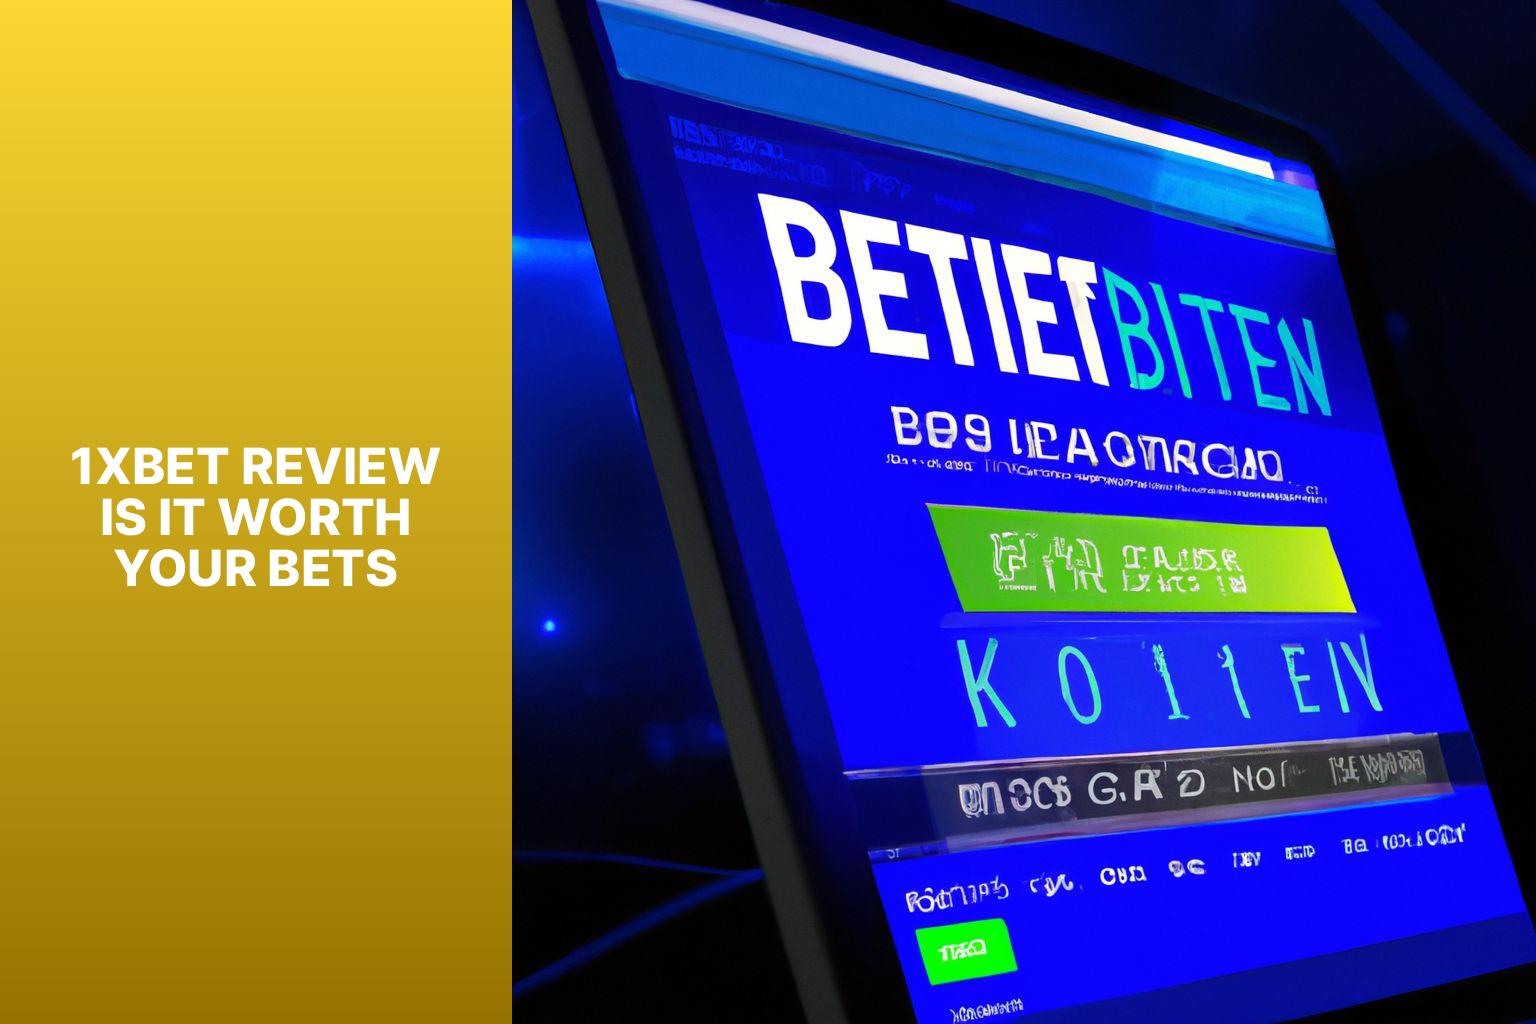 1xBet Review Is It Worth Your Bets